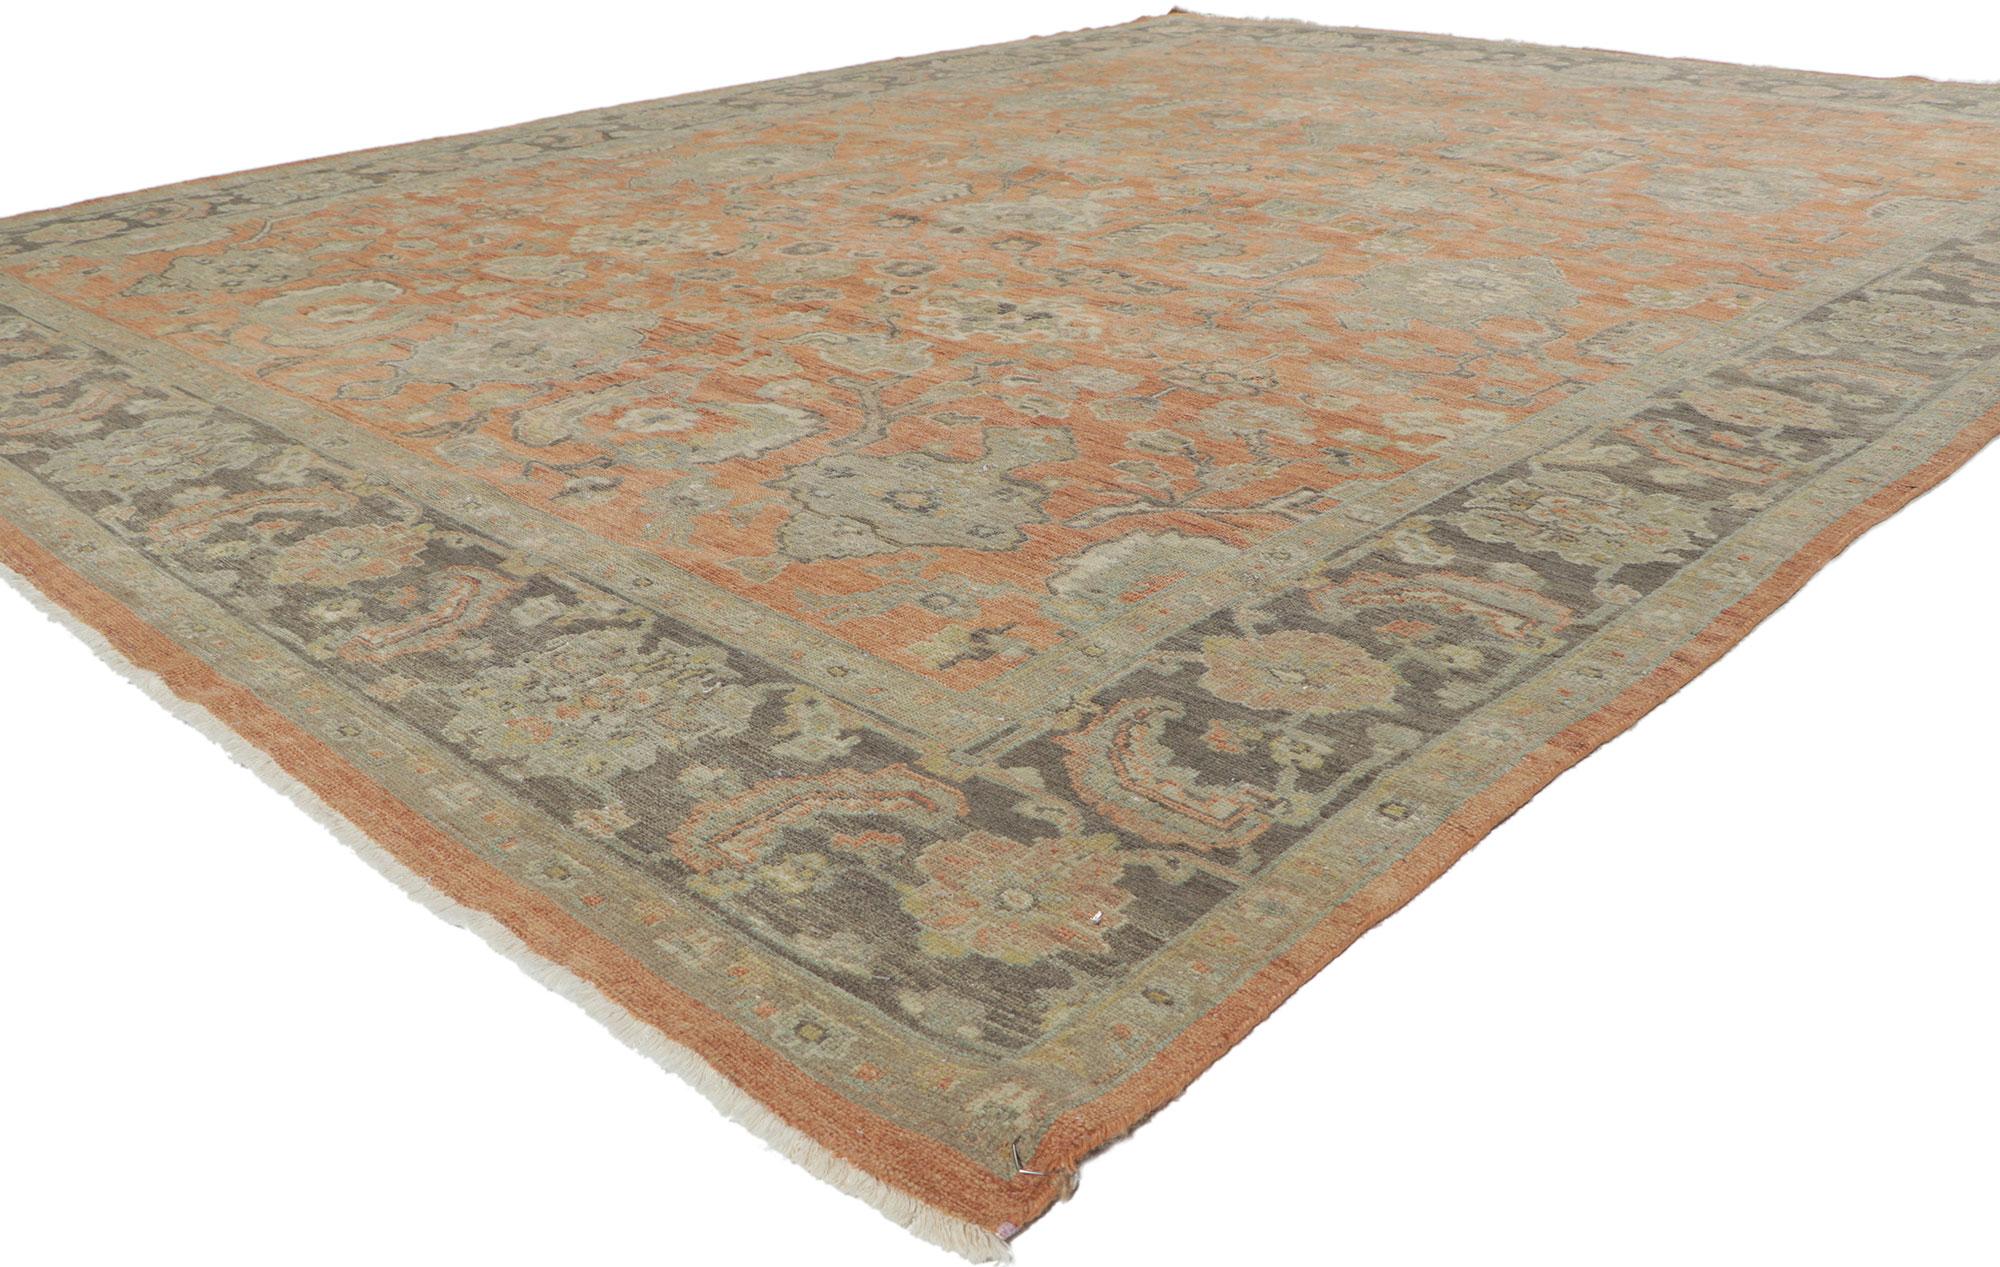 30835 New Distressed Oushak Rug with Vintage Style 08'11 x 11'07. Emanating traditional sensibility and rugged beauty with a cozy color palette, this hand-knotted wool distressed Indian Oushak rug creates an inimitable warmth and calming ambiance.